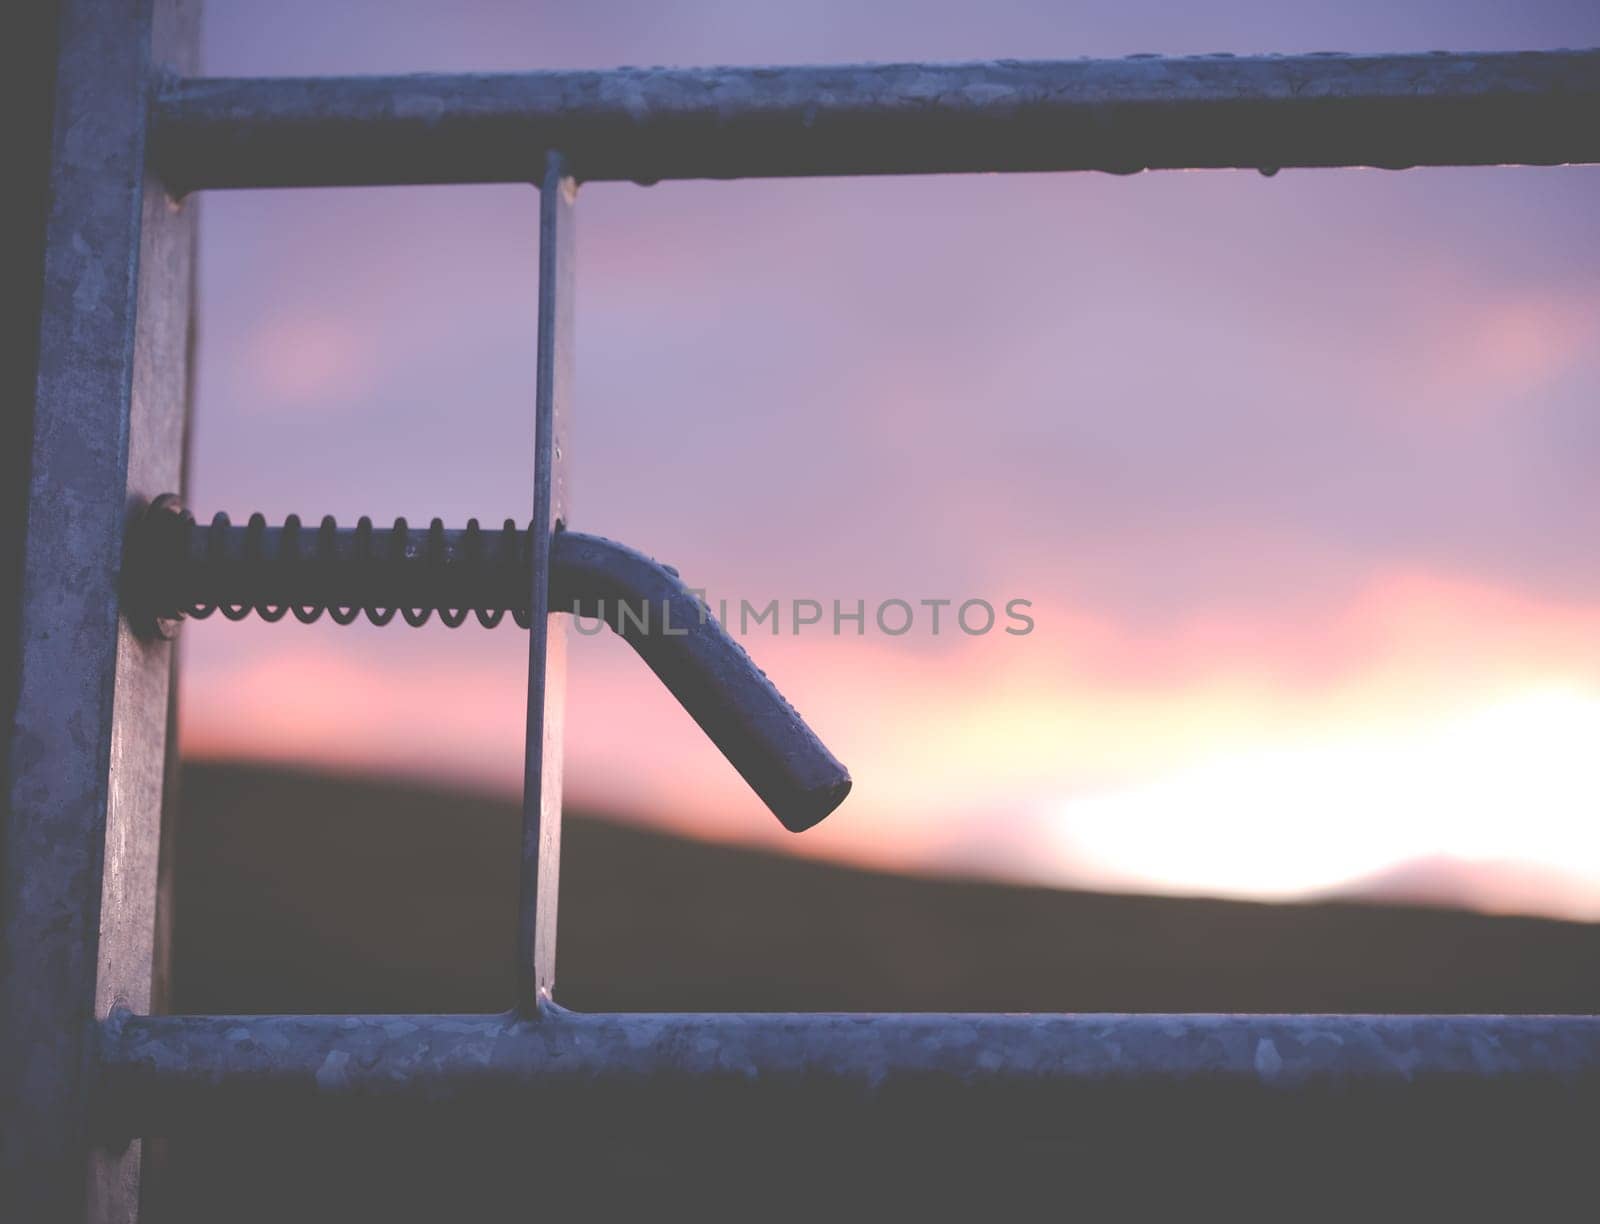 Droplets Of Water On A Gate After Rain In The Scottish Borders At Sunset, With Shallow Depth Of Focus